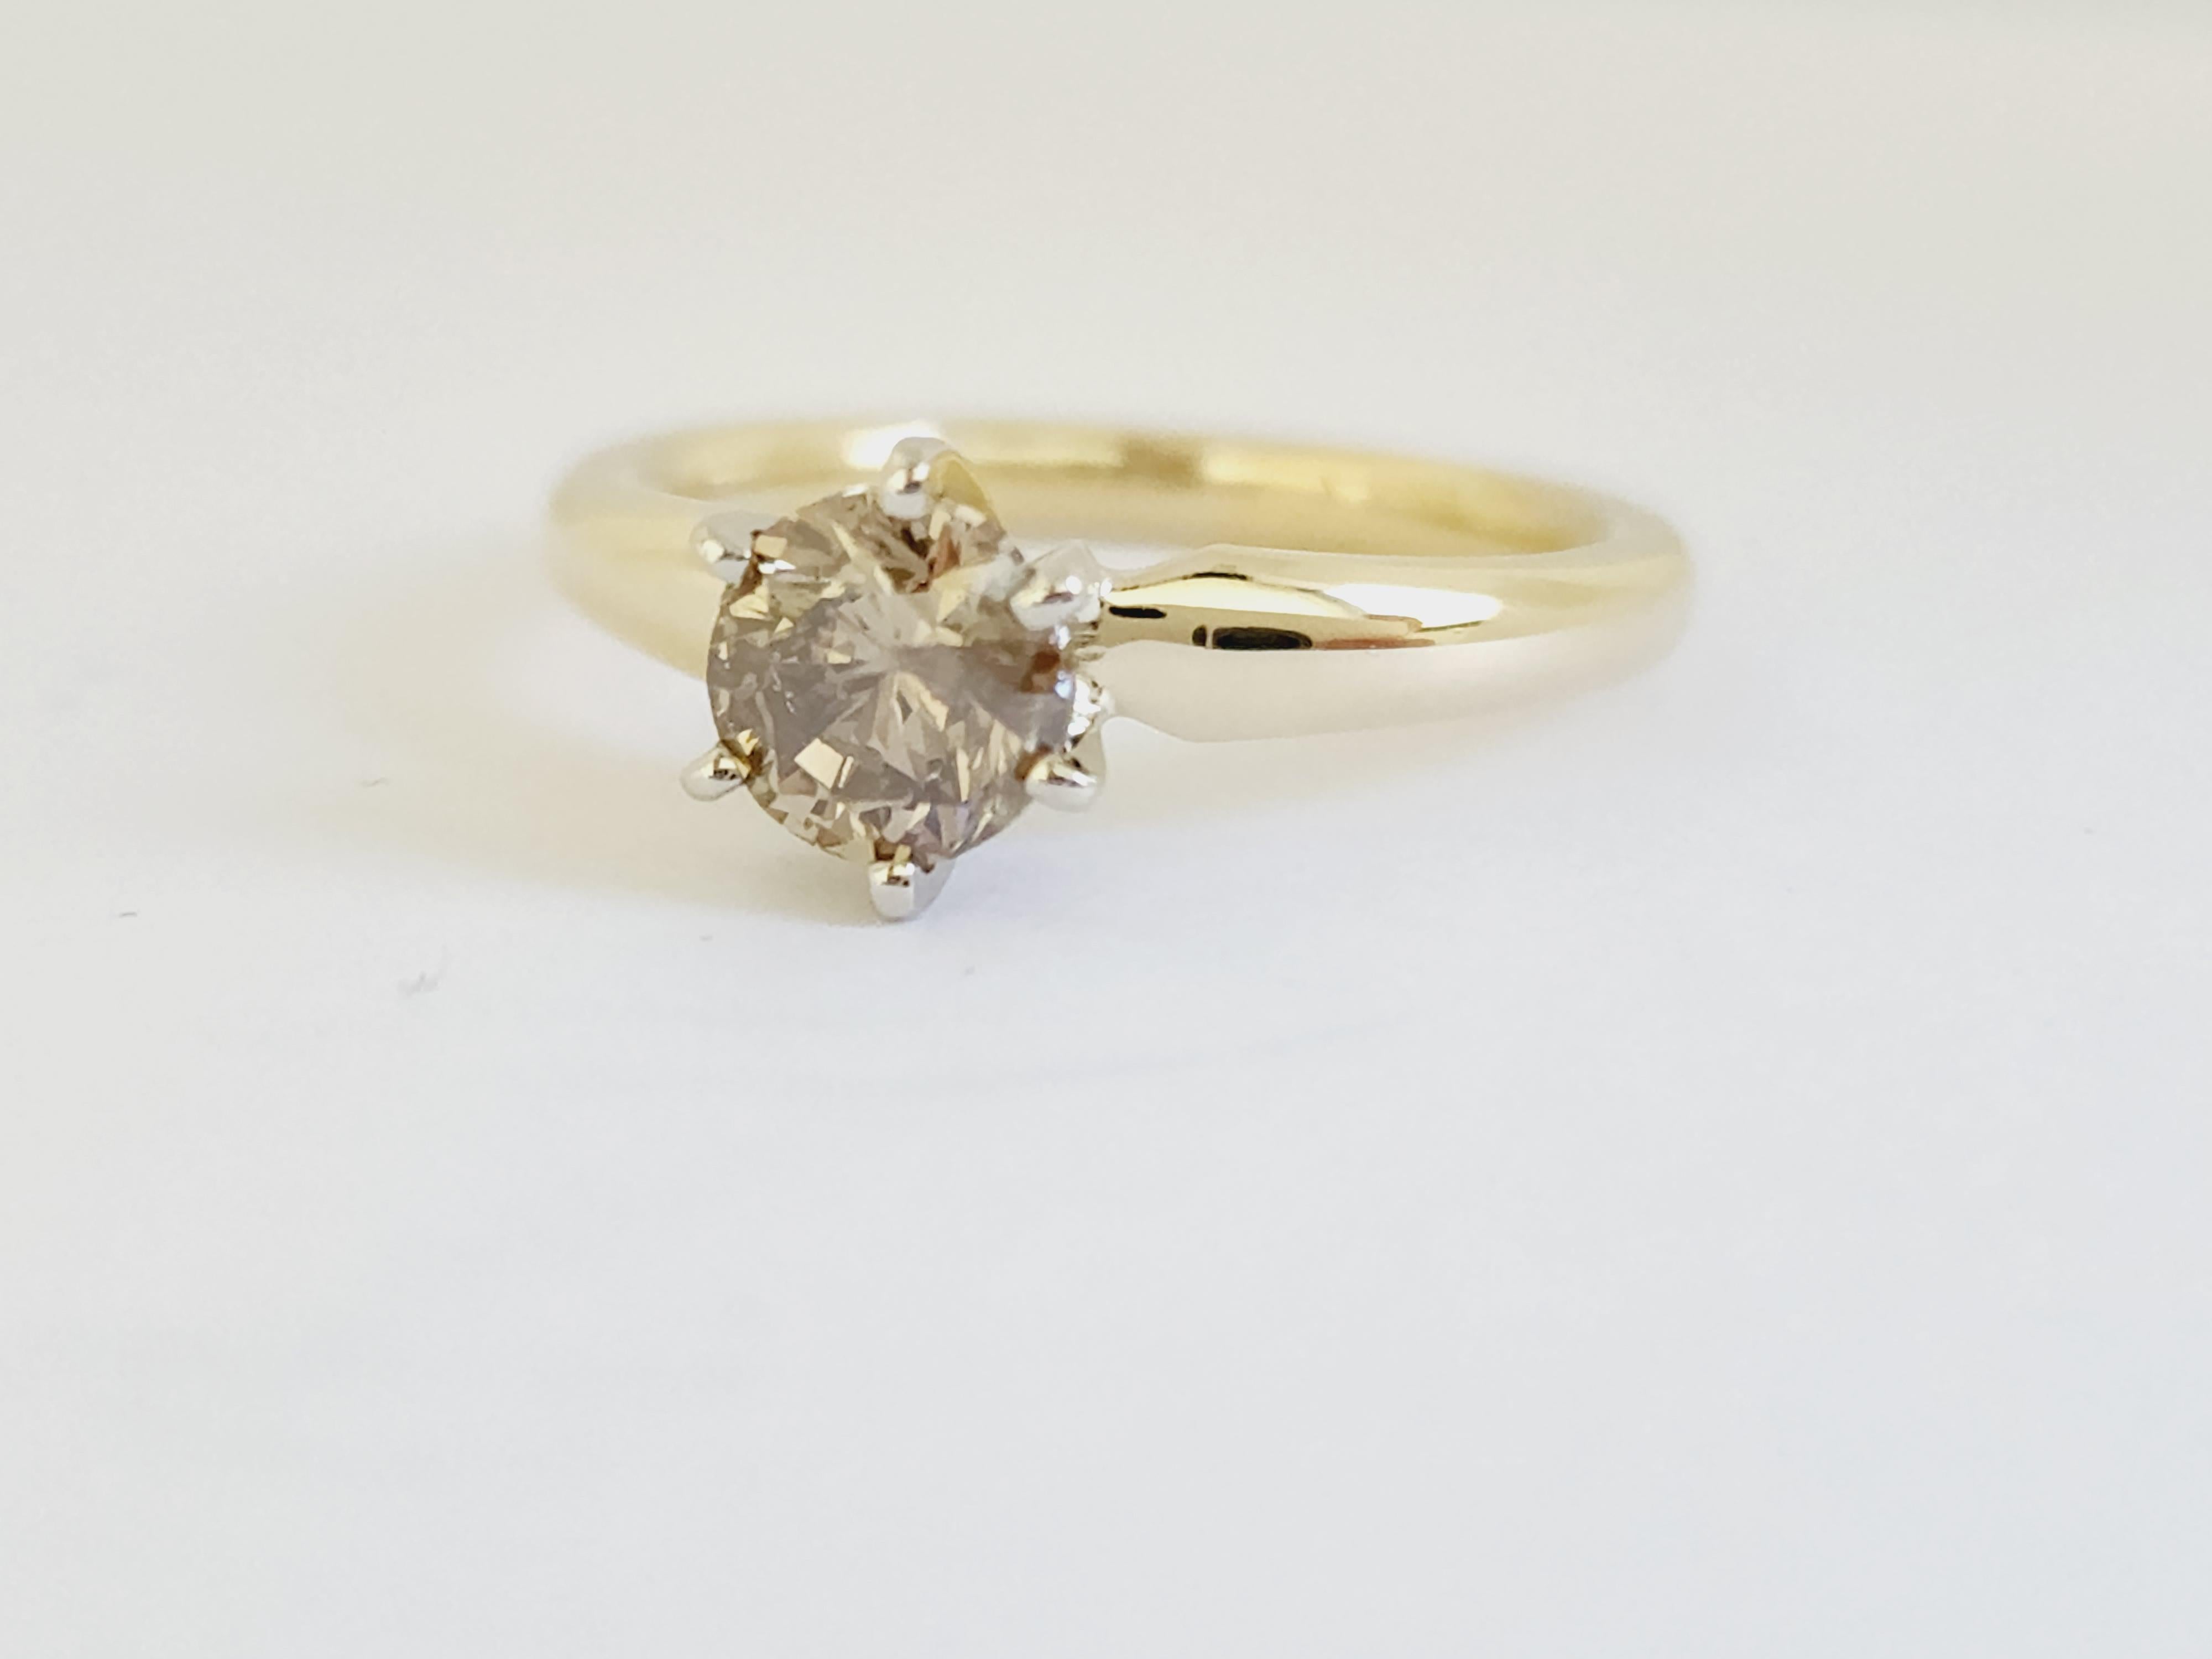 1 Carat Natural Fancy Dark Yellow Brown Round Diamond Ring 14 Karat Yellow Gold In New Condition For Sale In Great Neck, NY